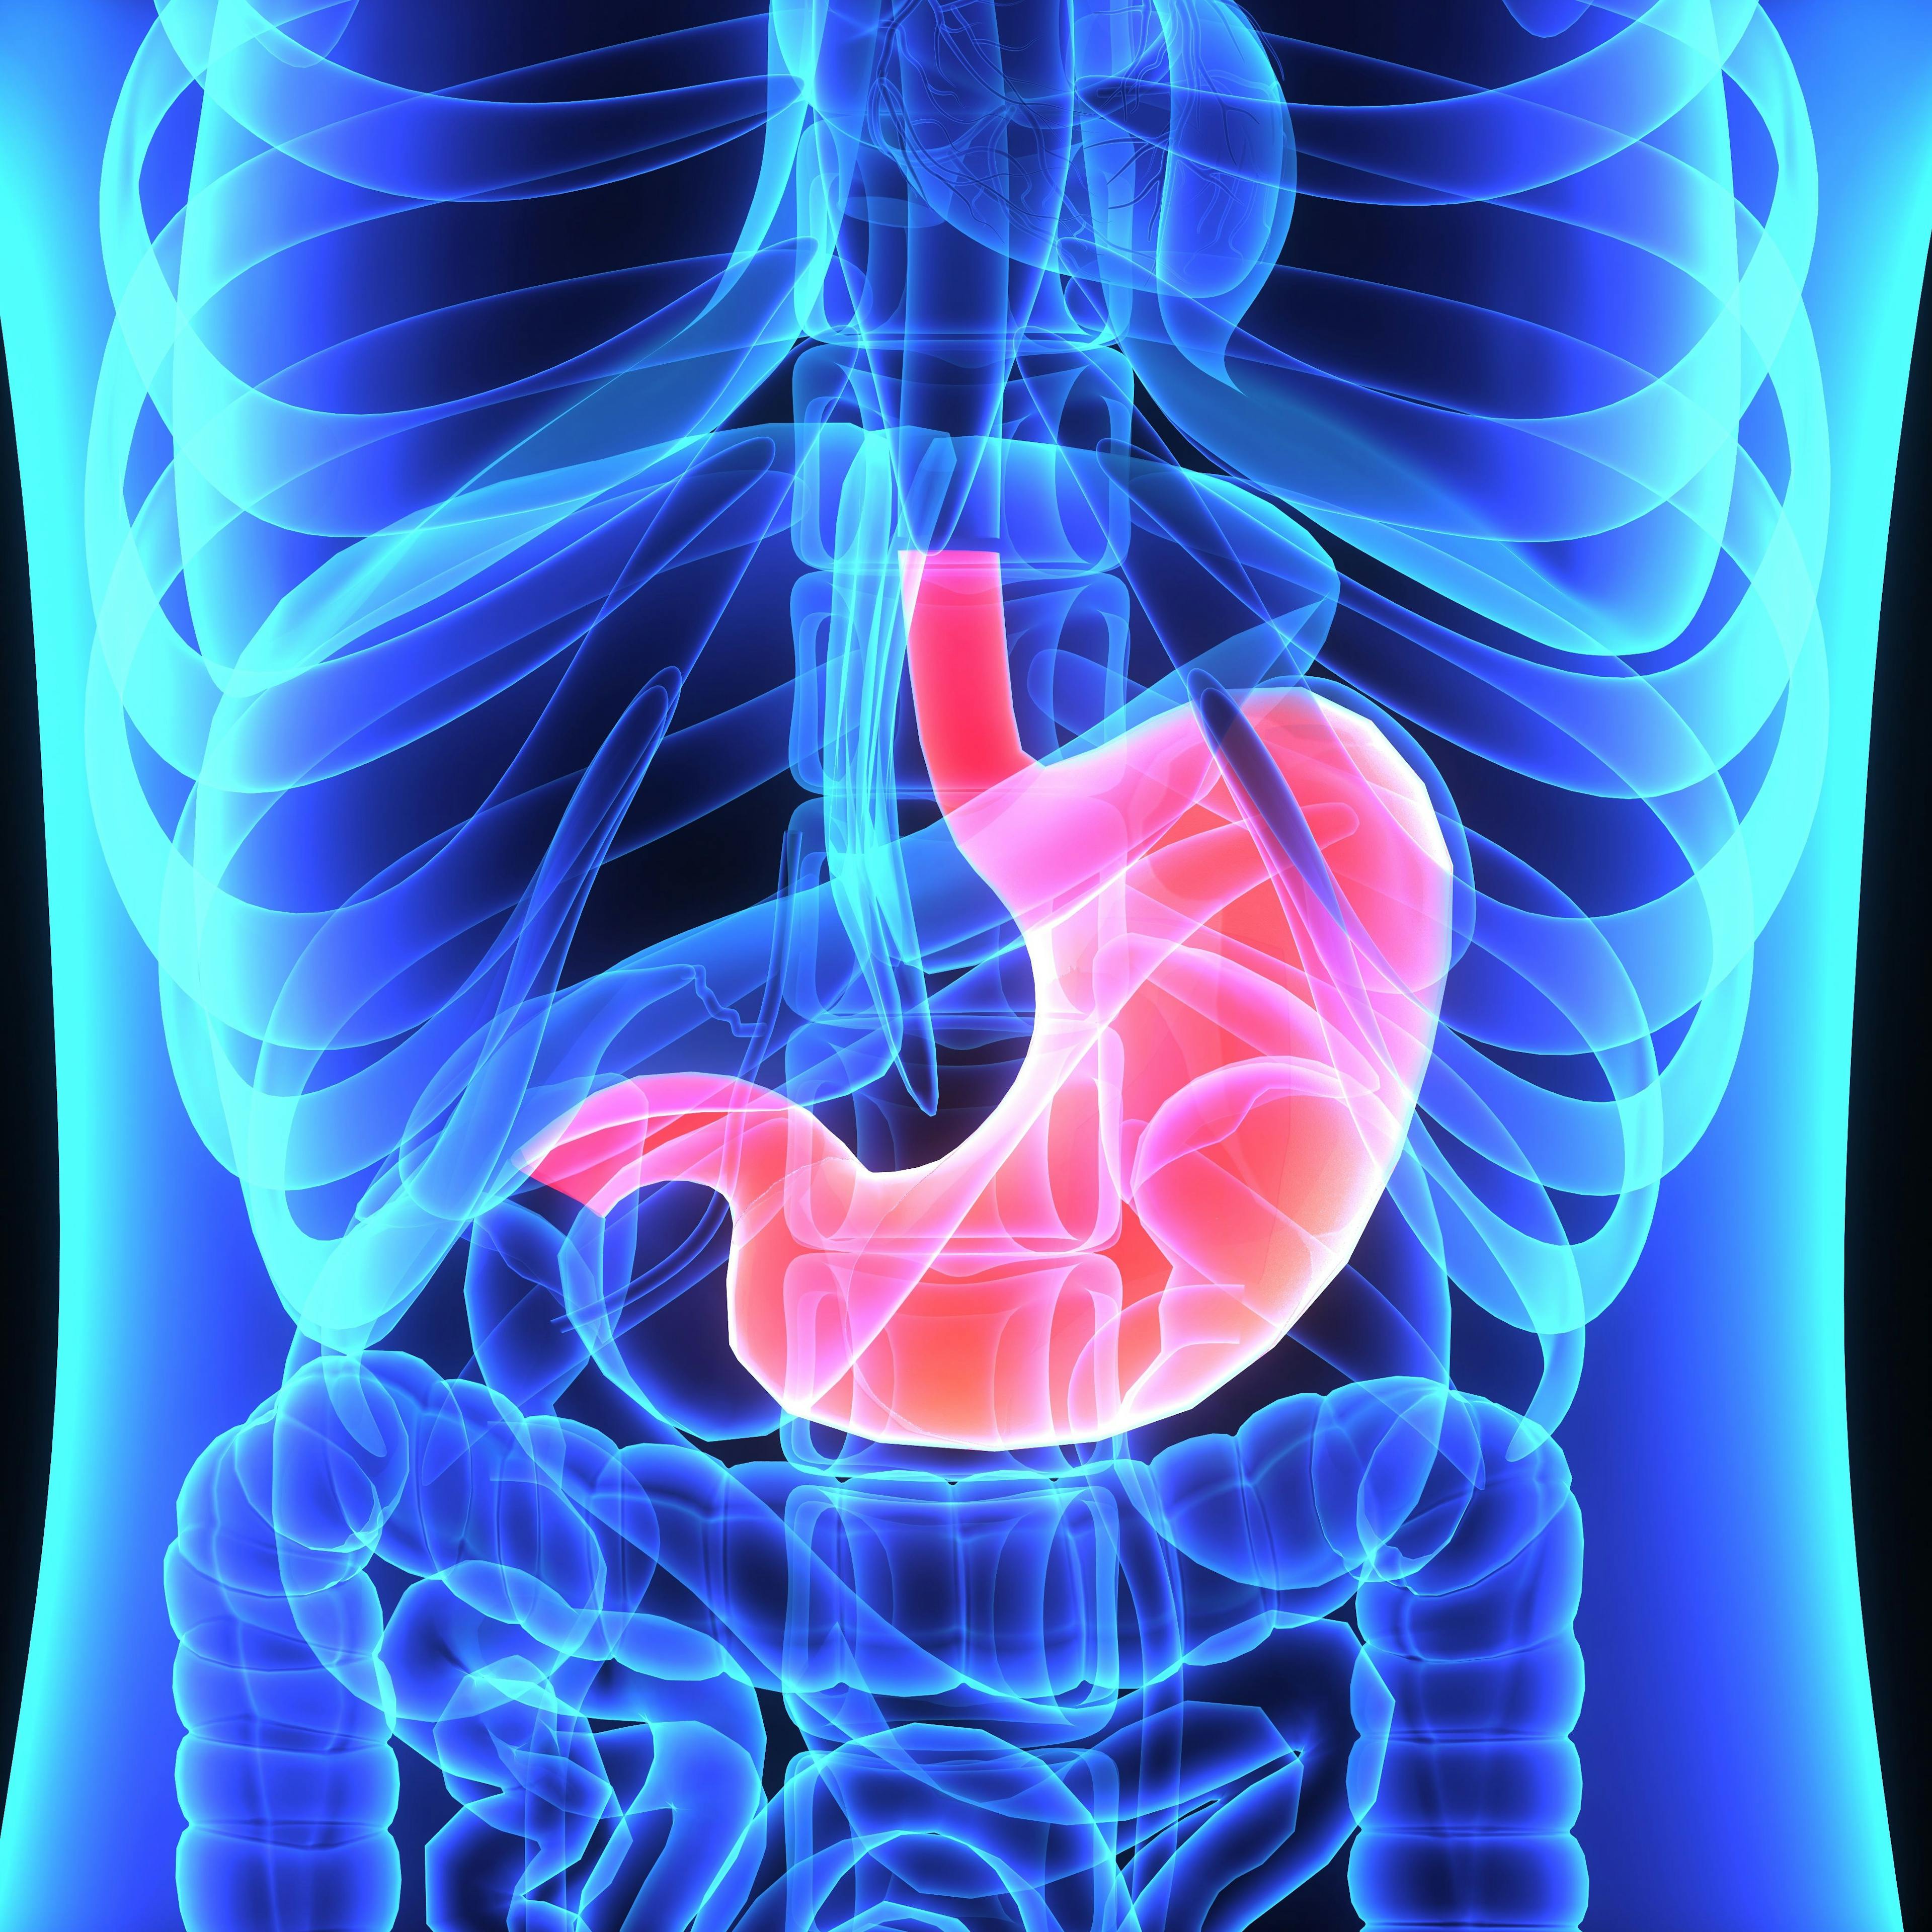 "Our findings suggest that regorafenib with nivolumab and chemotherapy is safe and showed promising anti-tumor activity in patients with advanced esophagogastric cancer," according to the authors of a phase 2 trial (NCT04757363).